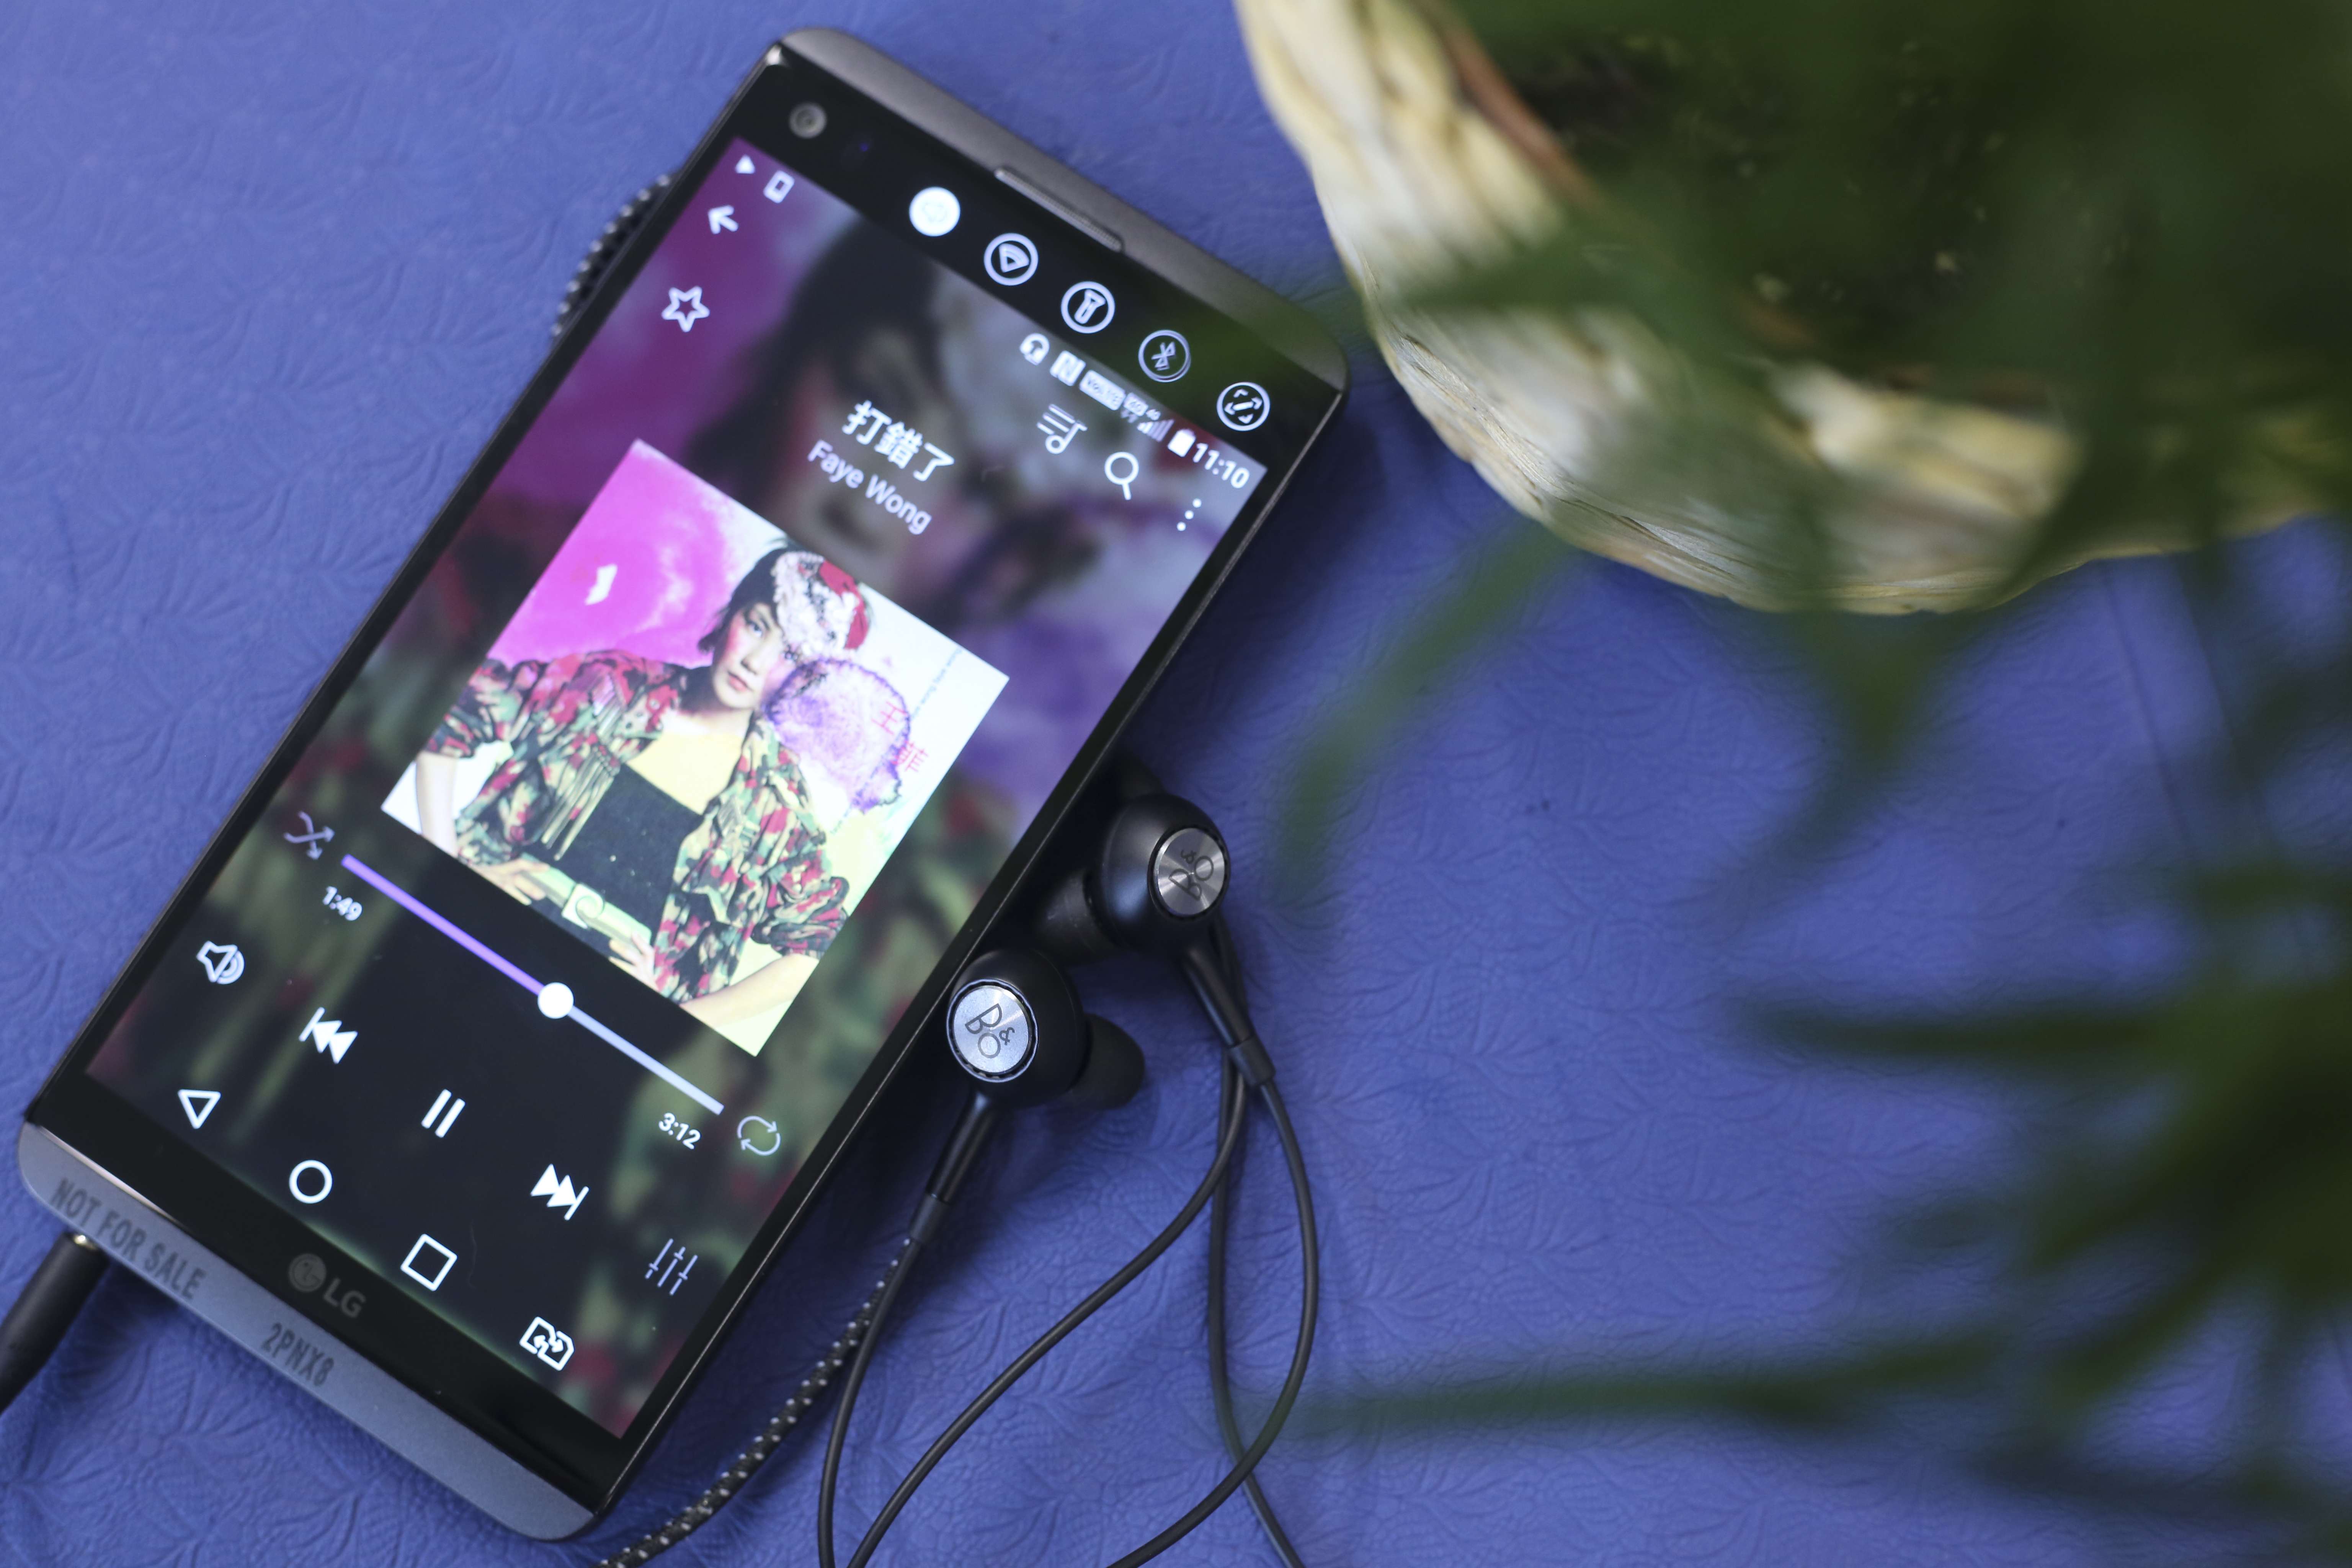 With its shock resistance, tougher build quality and audiophile playback and recording, the V20 is ideally poised to overtake crisis-hit Samsung. Pity it’s not waterproof, though